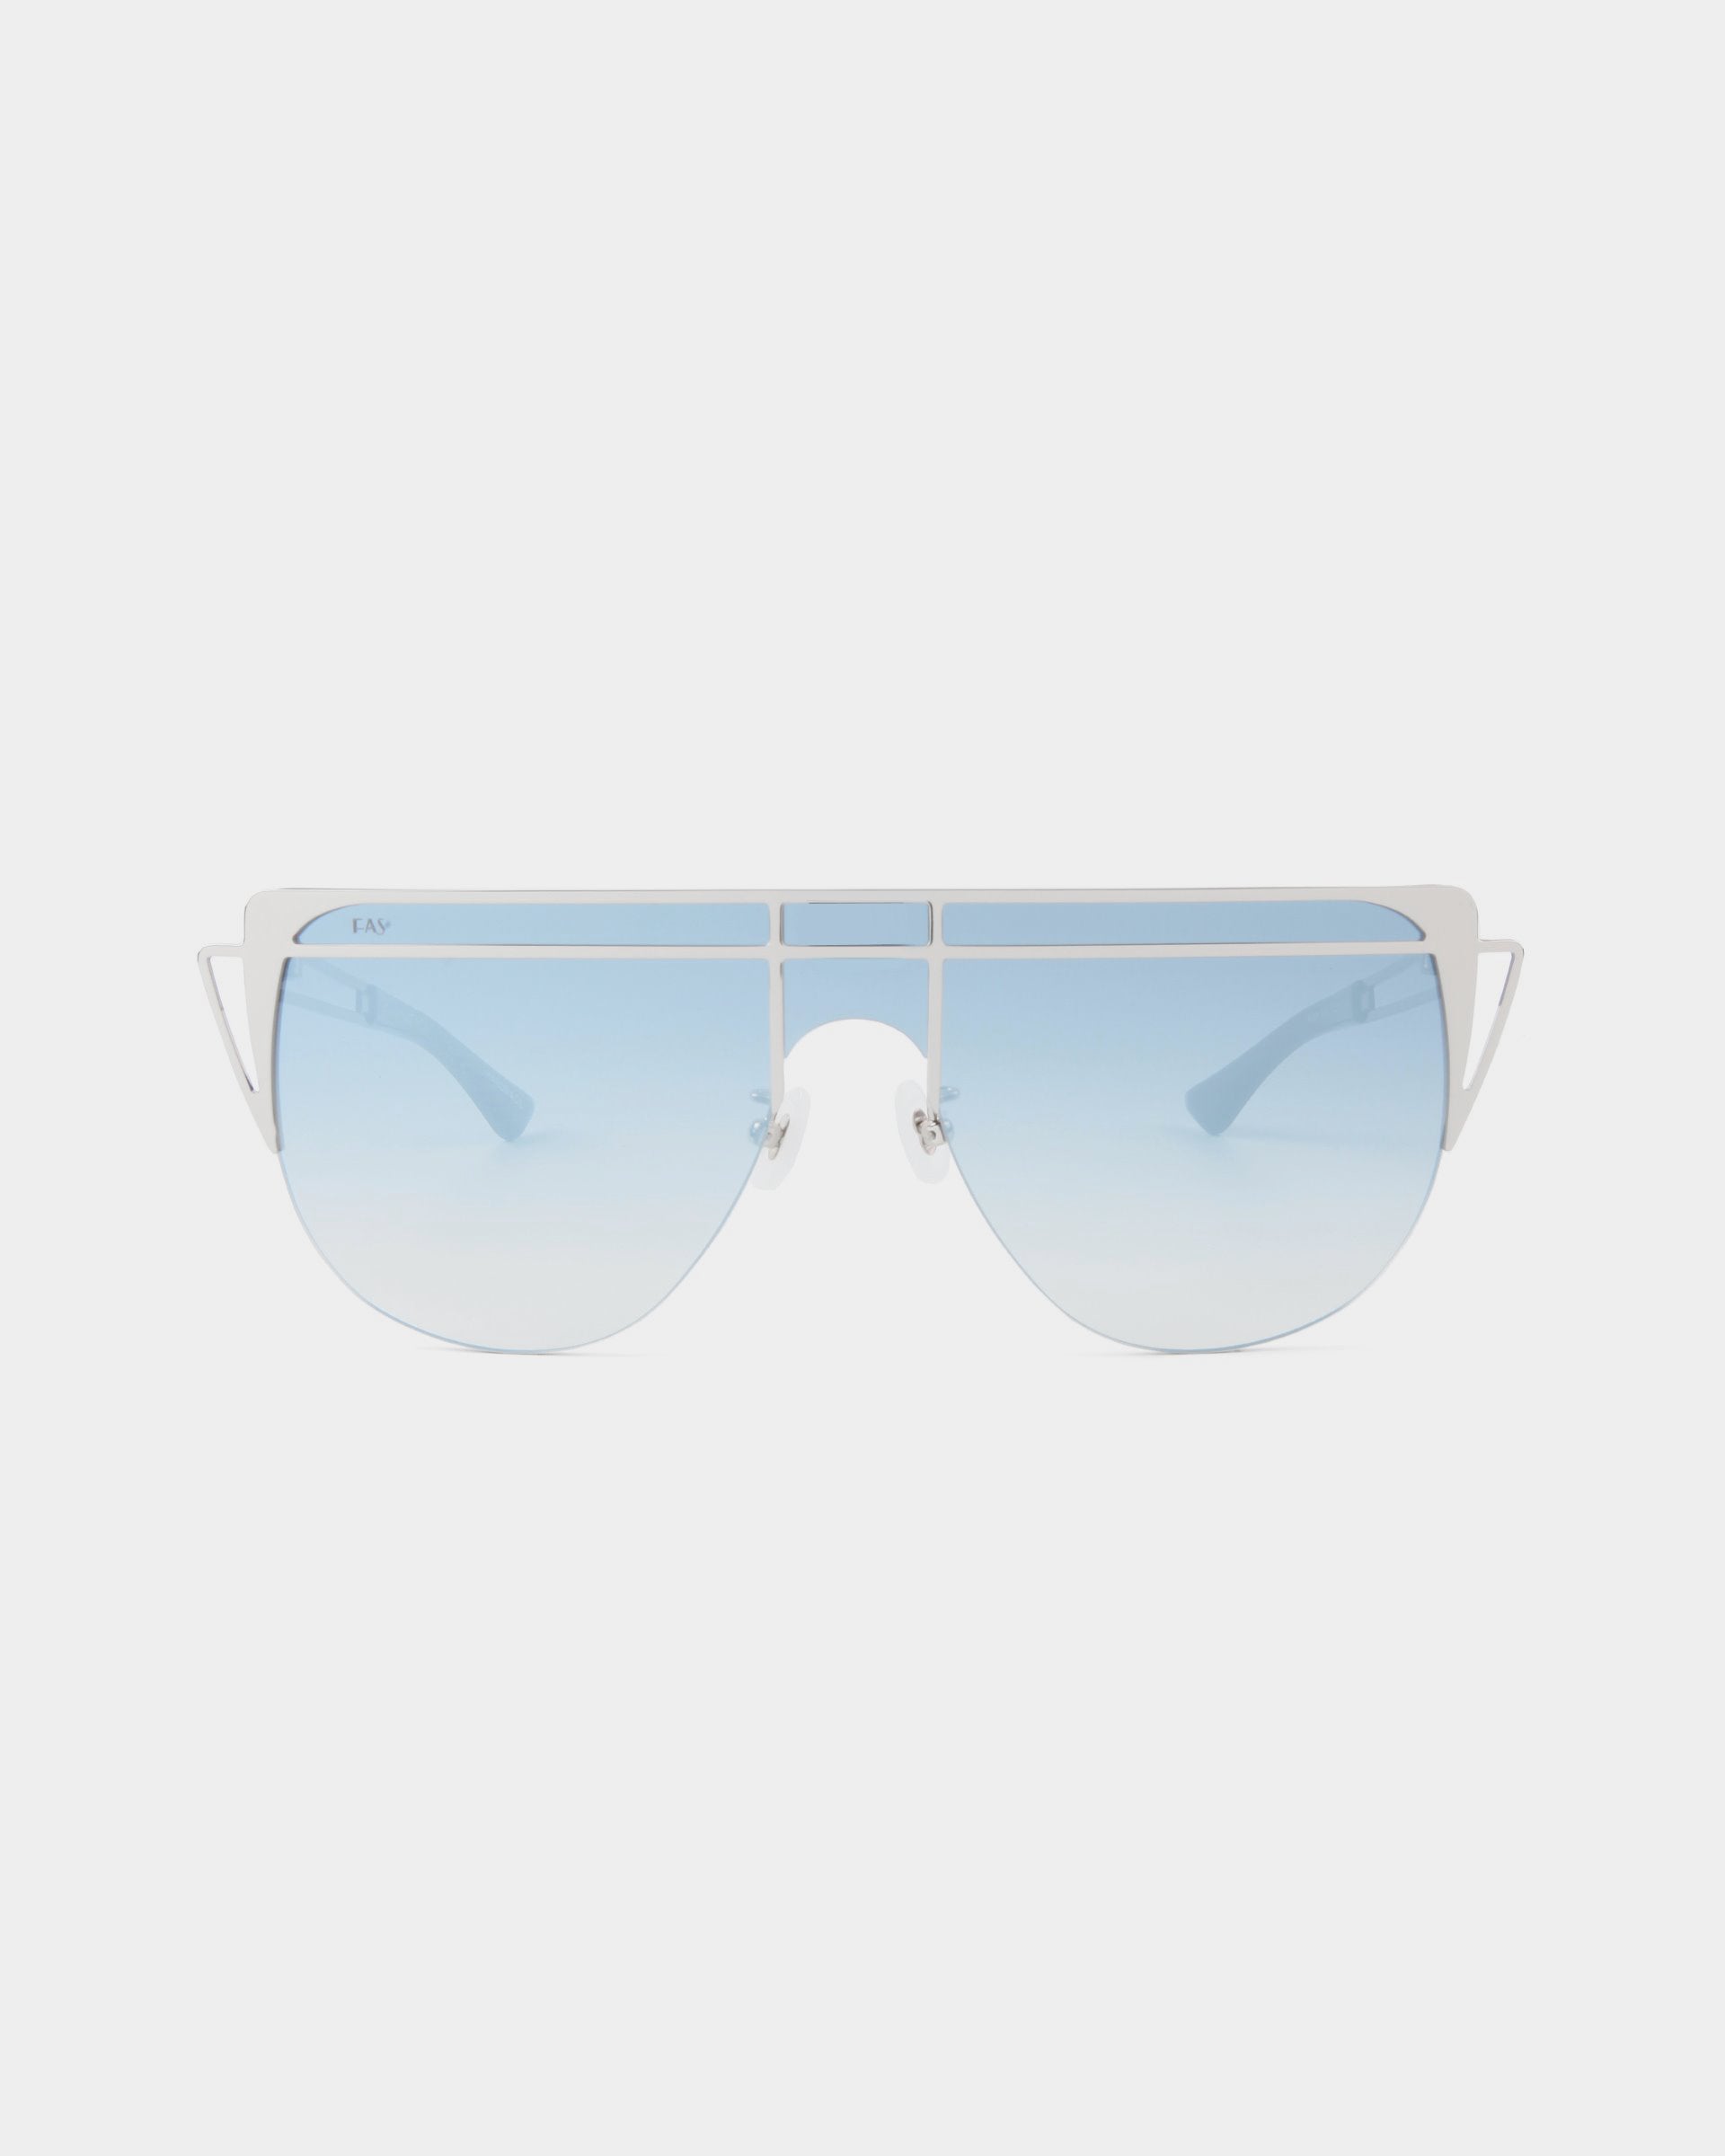 A pair of avant-garde aviator-style sunglasses with a thin, white metal frame and gradient blue lenses. The temples are slim, featuring a double bridge at the nose area. They offer 100% UV protection. These are the Alien by For Art's Sake®. The background is plain white.